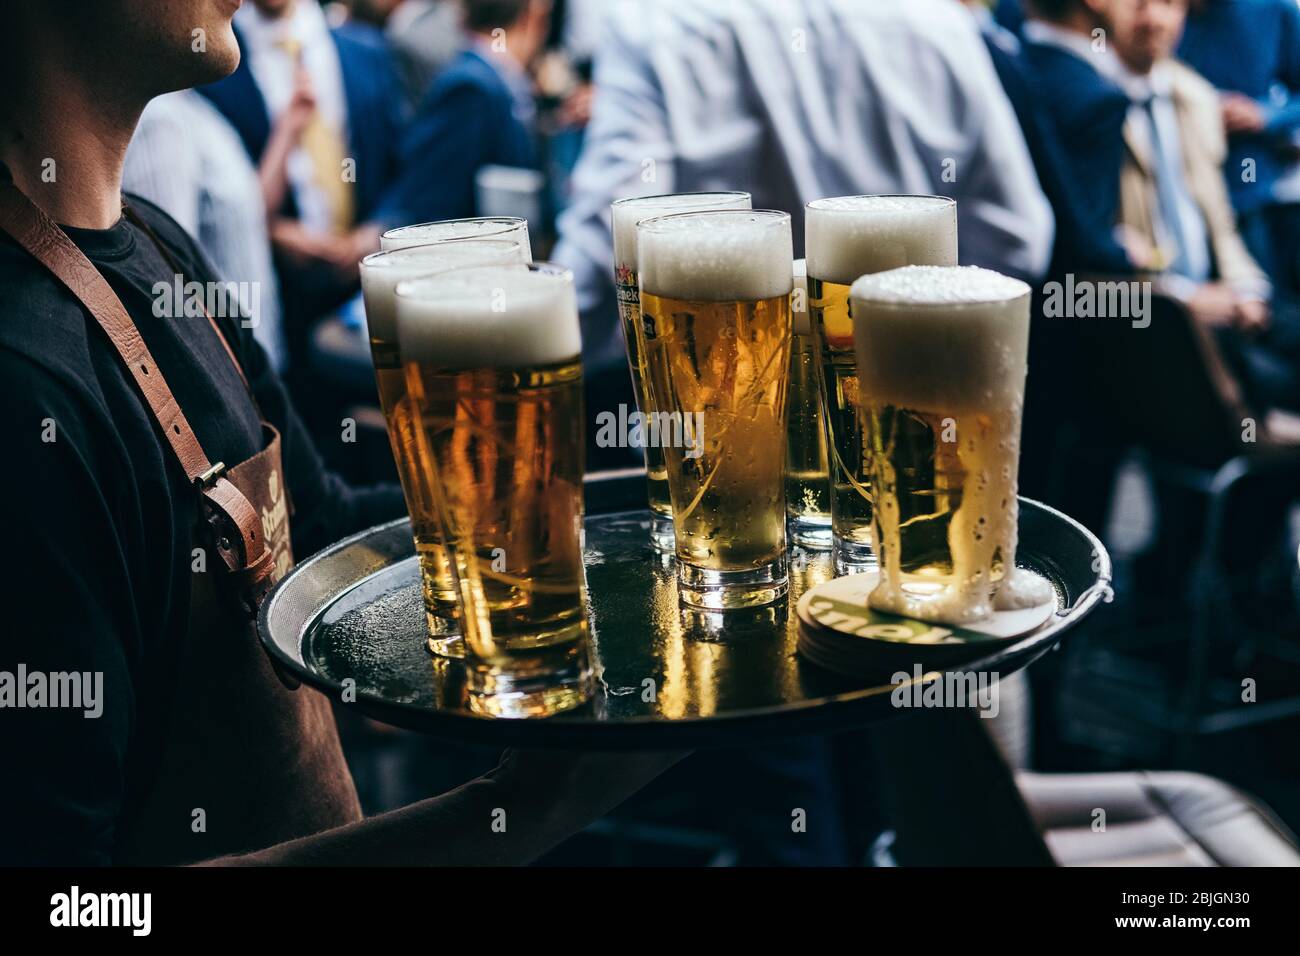 waiter carries tray full of glasses of beer to customers at outdoor bar or pub Stock Photo